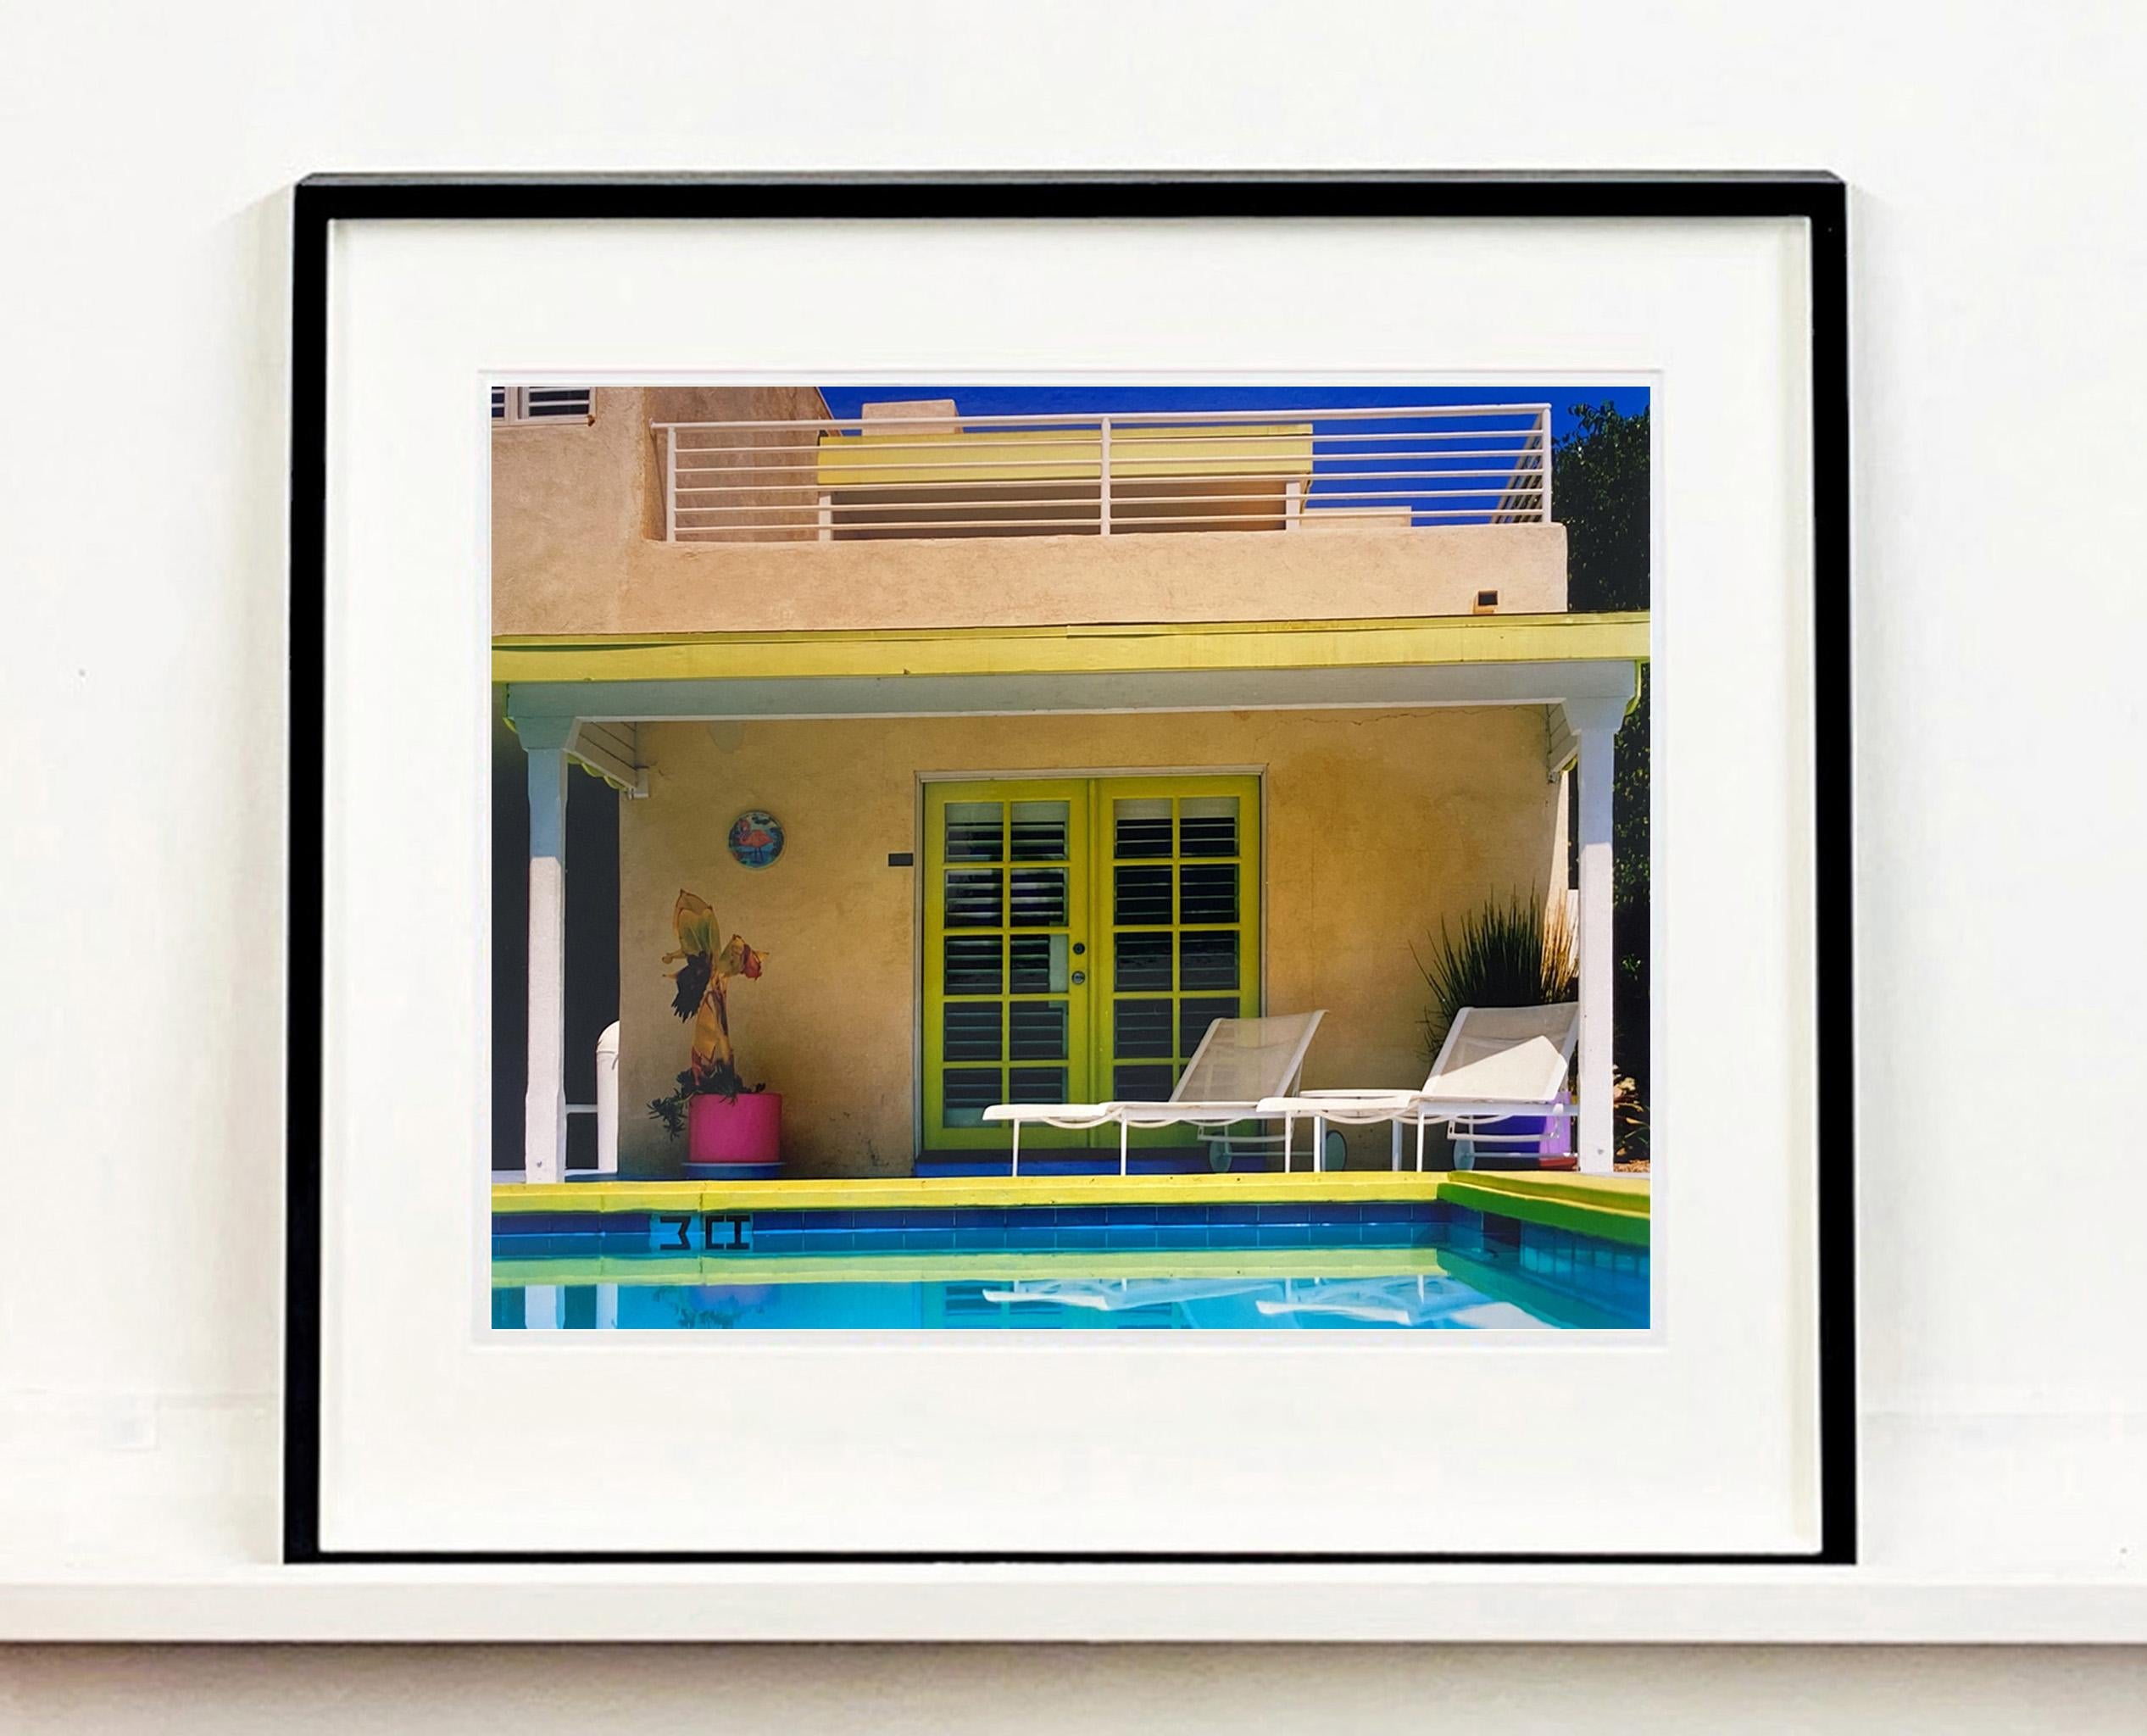 Palm Springs Poolside, photography by Richard Heeps at Ballantines Movie Colony. This artwork captures the classic mid-century Palm Springs architecture set against saturated blue skies and the cool pool with accents of pink and almost neon